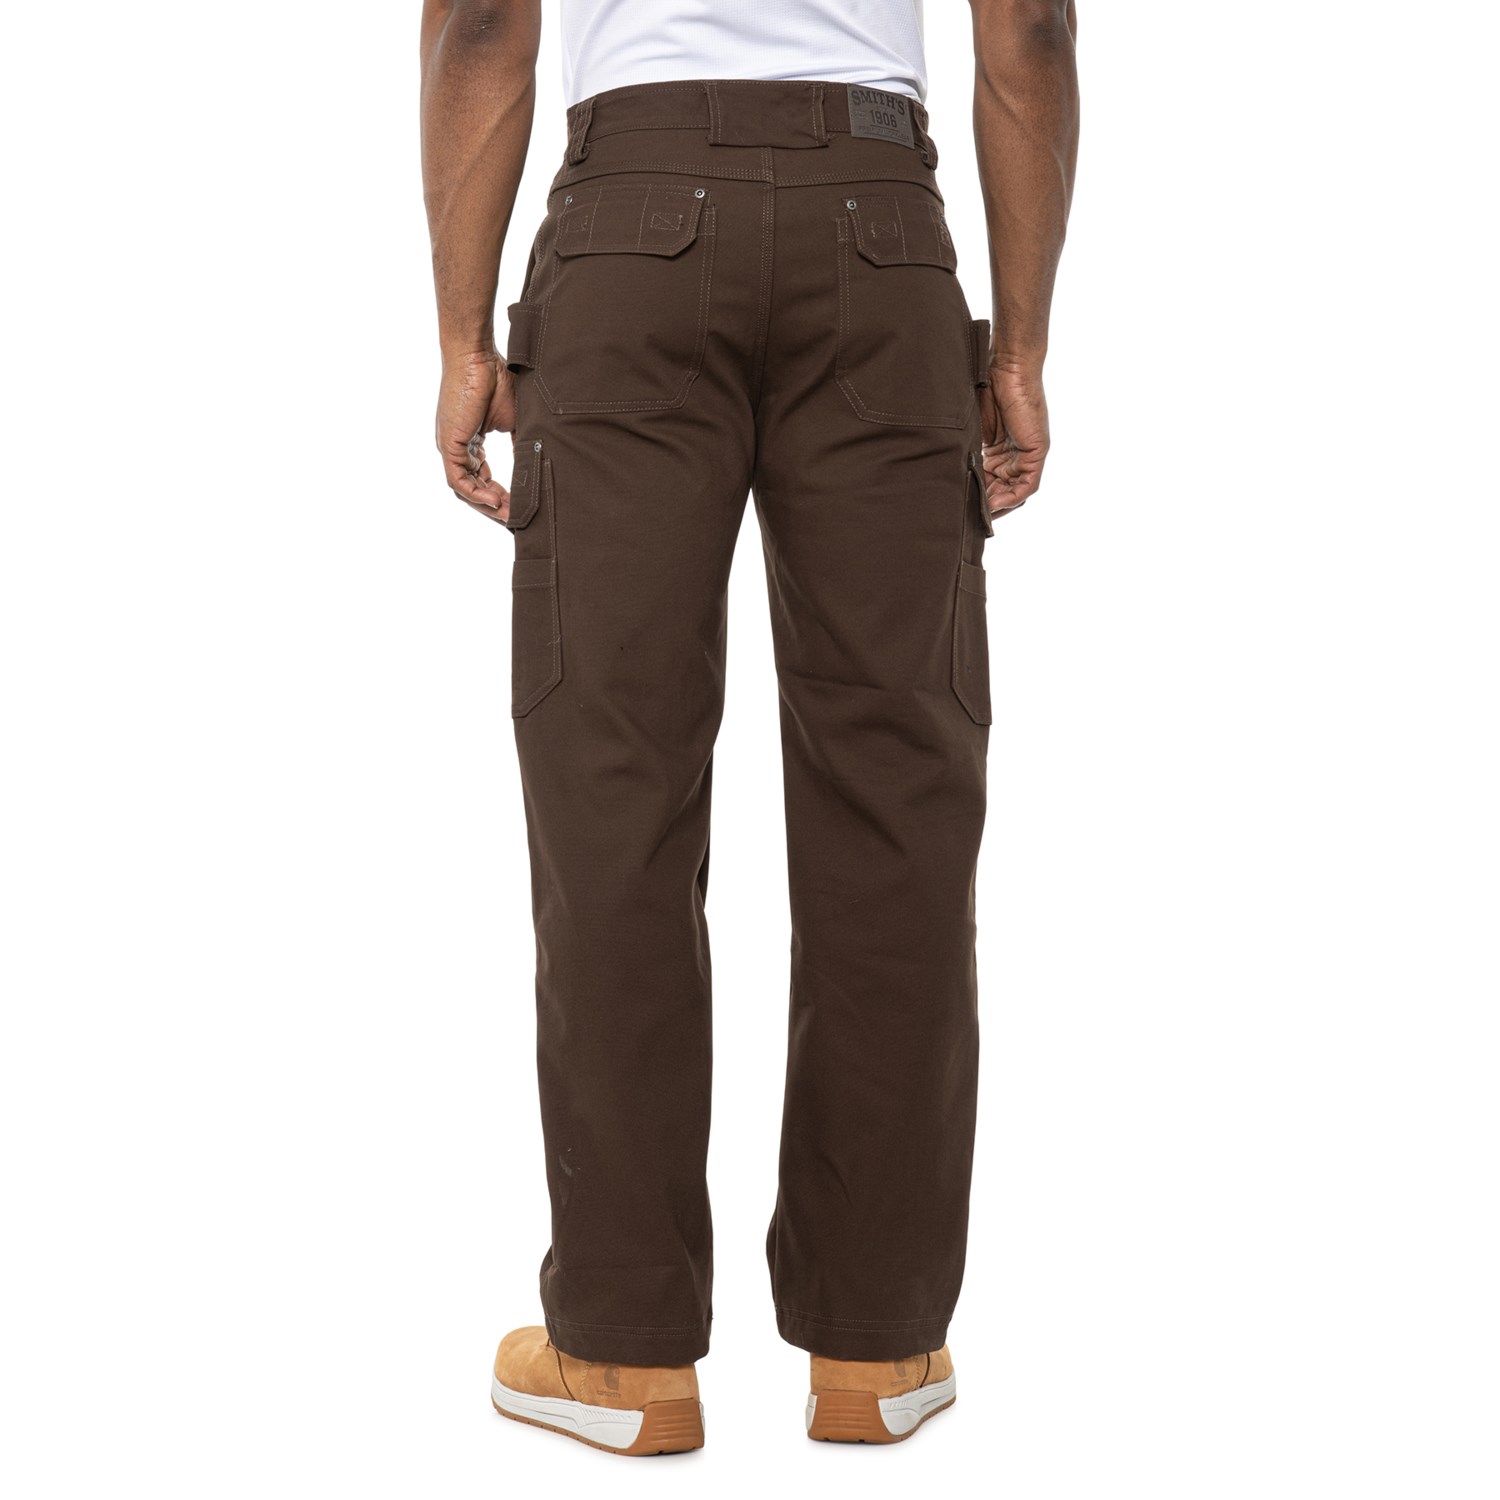 Smith's Workwear Utility Cargo Work Pants (For Men) - Save 40%